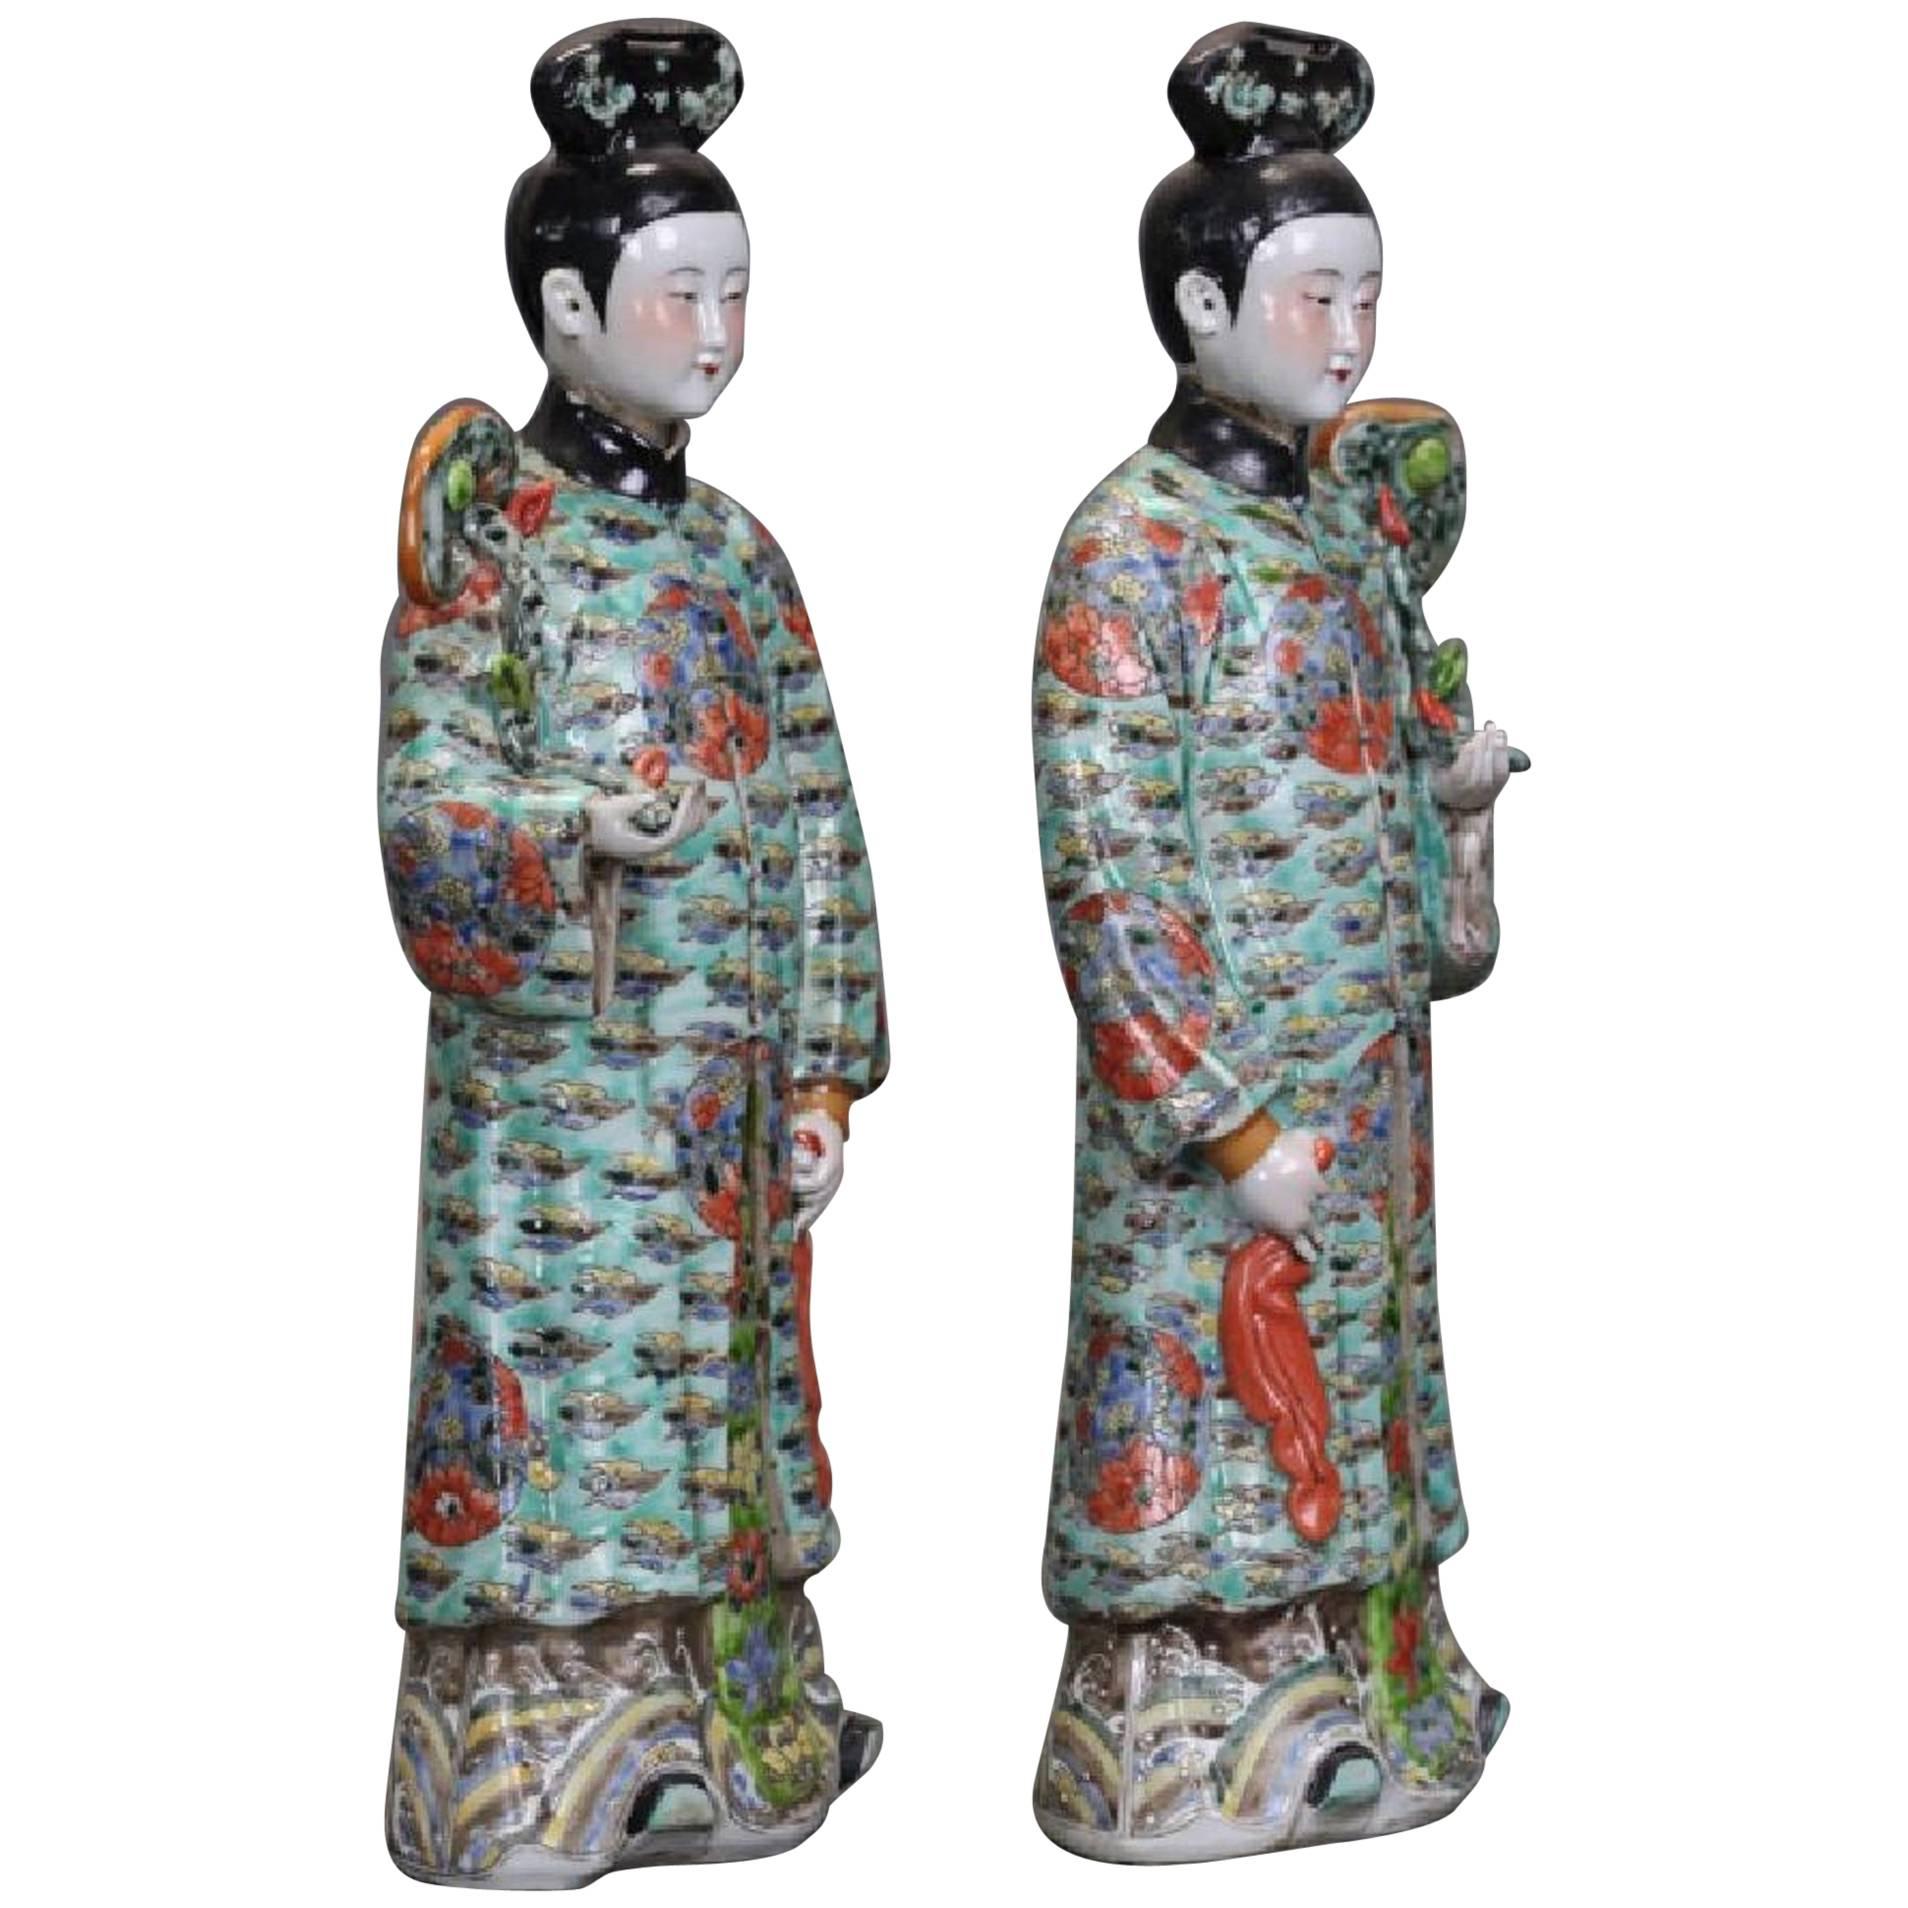 A lovely pair of Chinese export porcelain figures of court ladies with nodding heads, late Qing Dynasty, circa 1900, China.
The elegant ladies dressed in gorgeous traditional robes in the Manchu court style. The robes of greenish blue with a dense